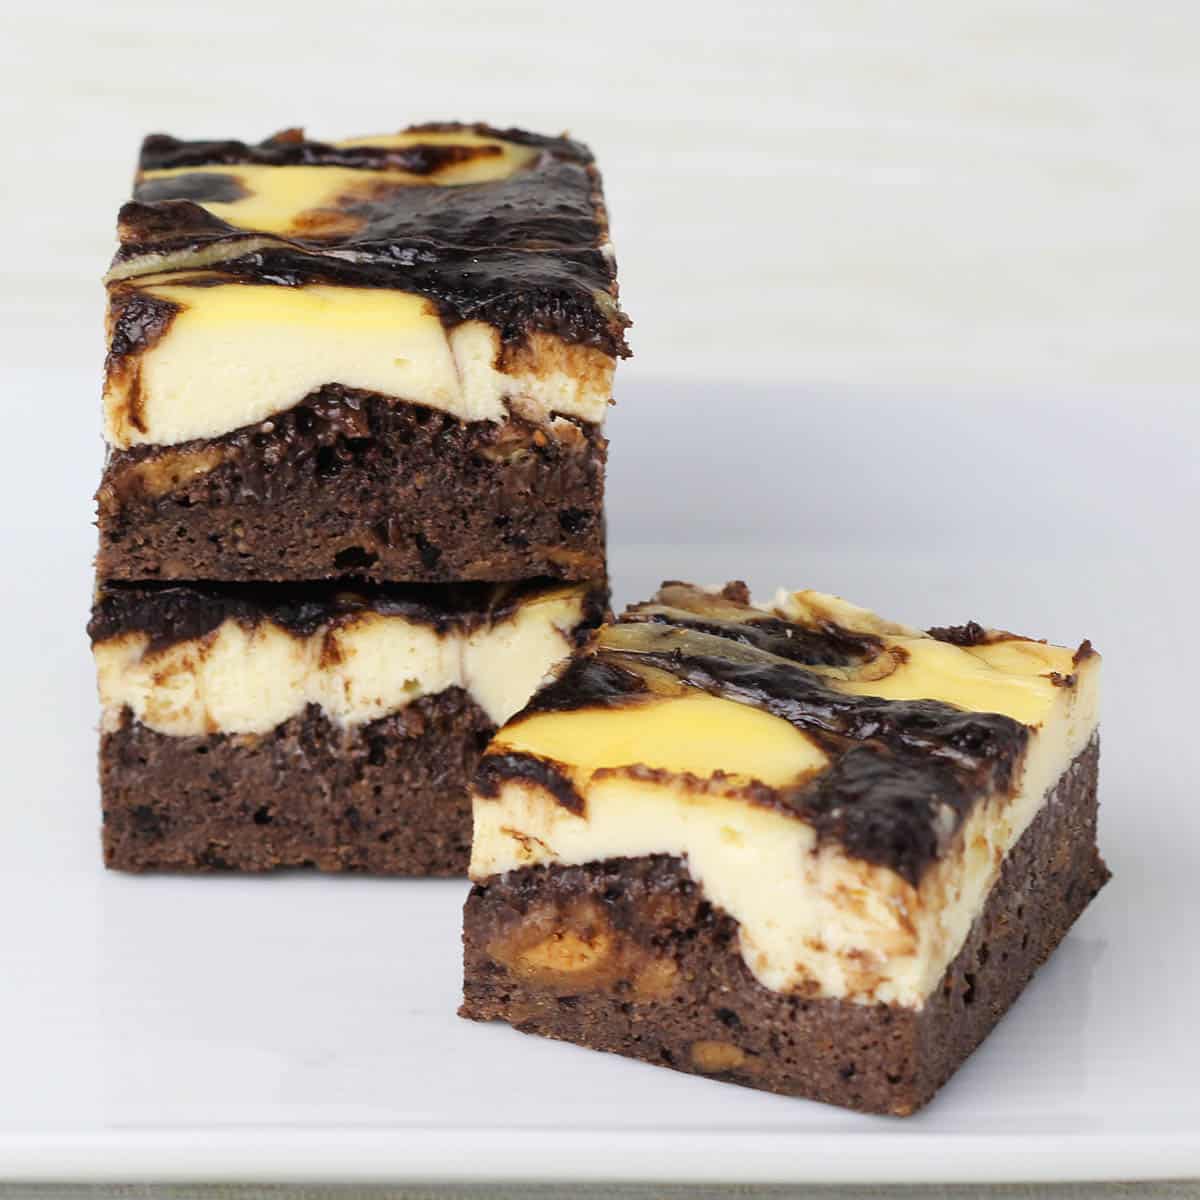 three pieces of cheesecake brownie (cheesecake layer on top of a brownie layer), two pieces are stacked on the left, and one is angled in front all on a white plate